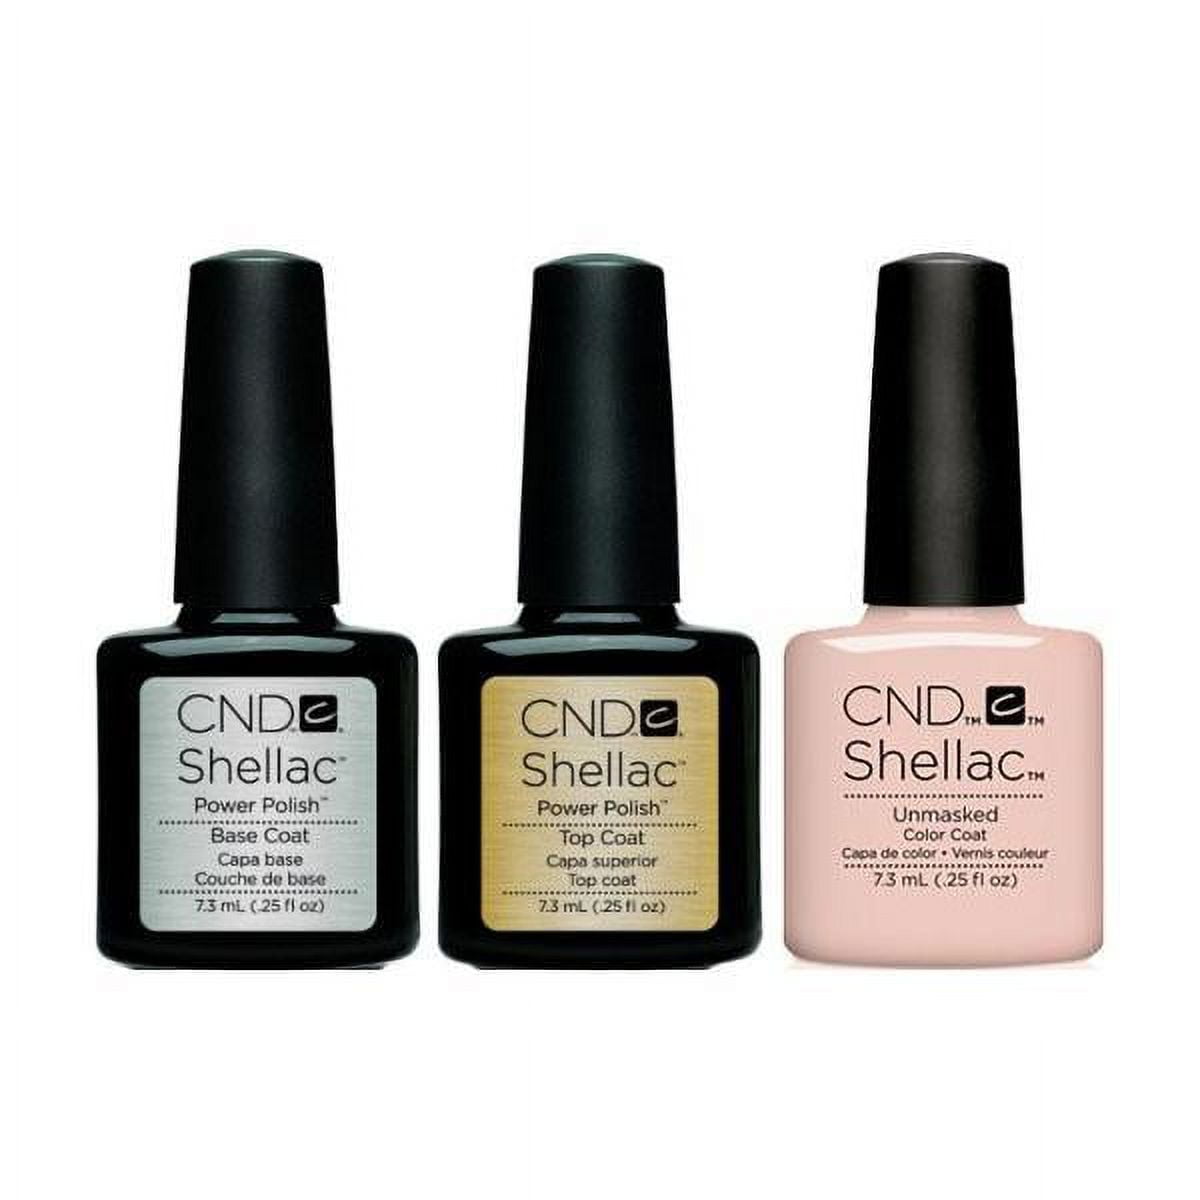 These At-Home Gel Nail Kits Are So Good, You'll Cancel Your Next Manicure  Appointment | Home gel nail kit, Gel nails at home, Gel nail kit